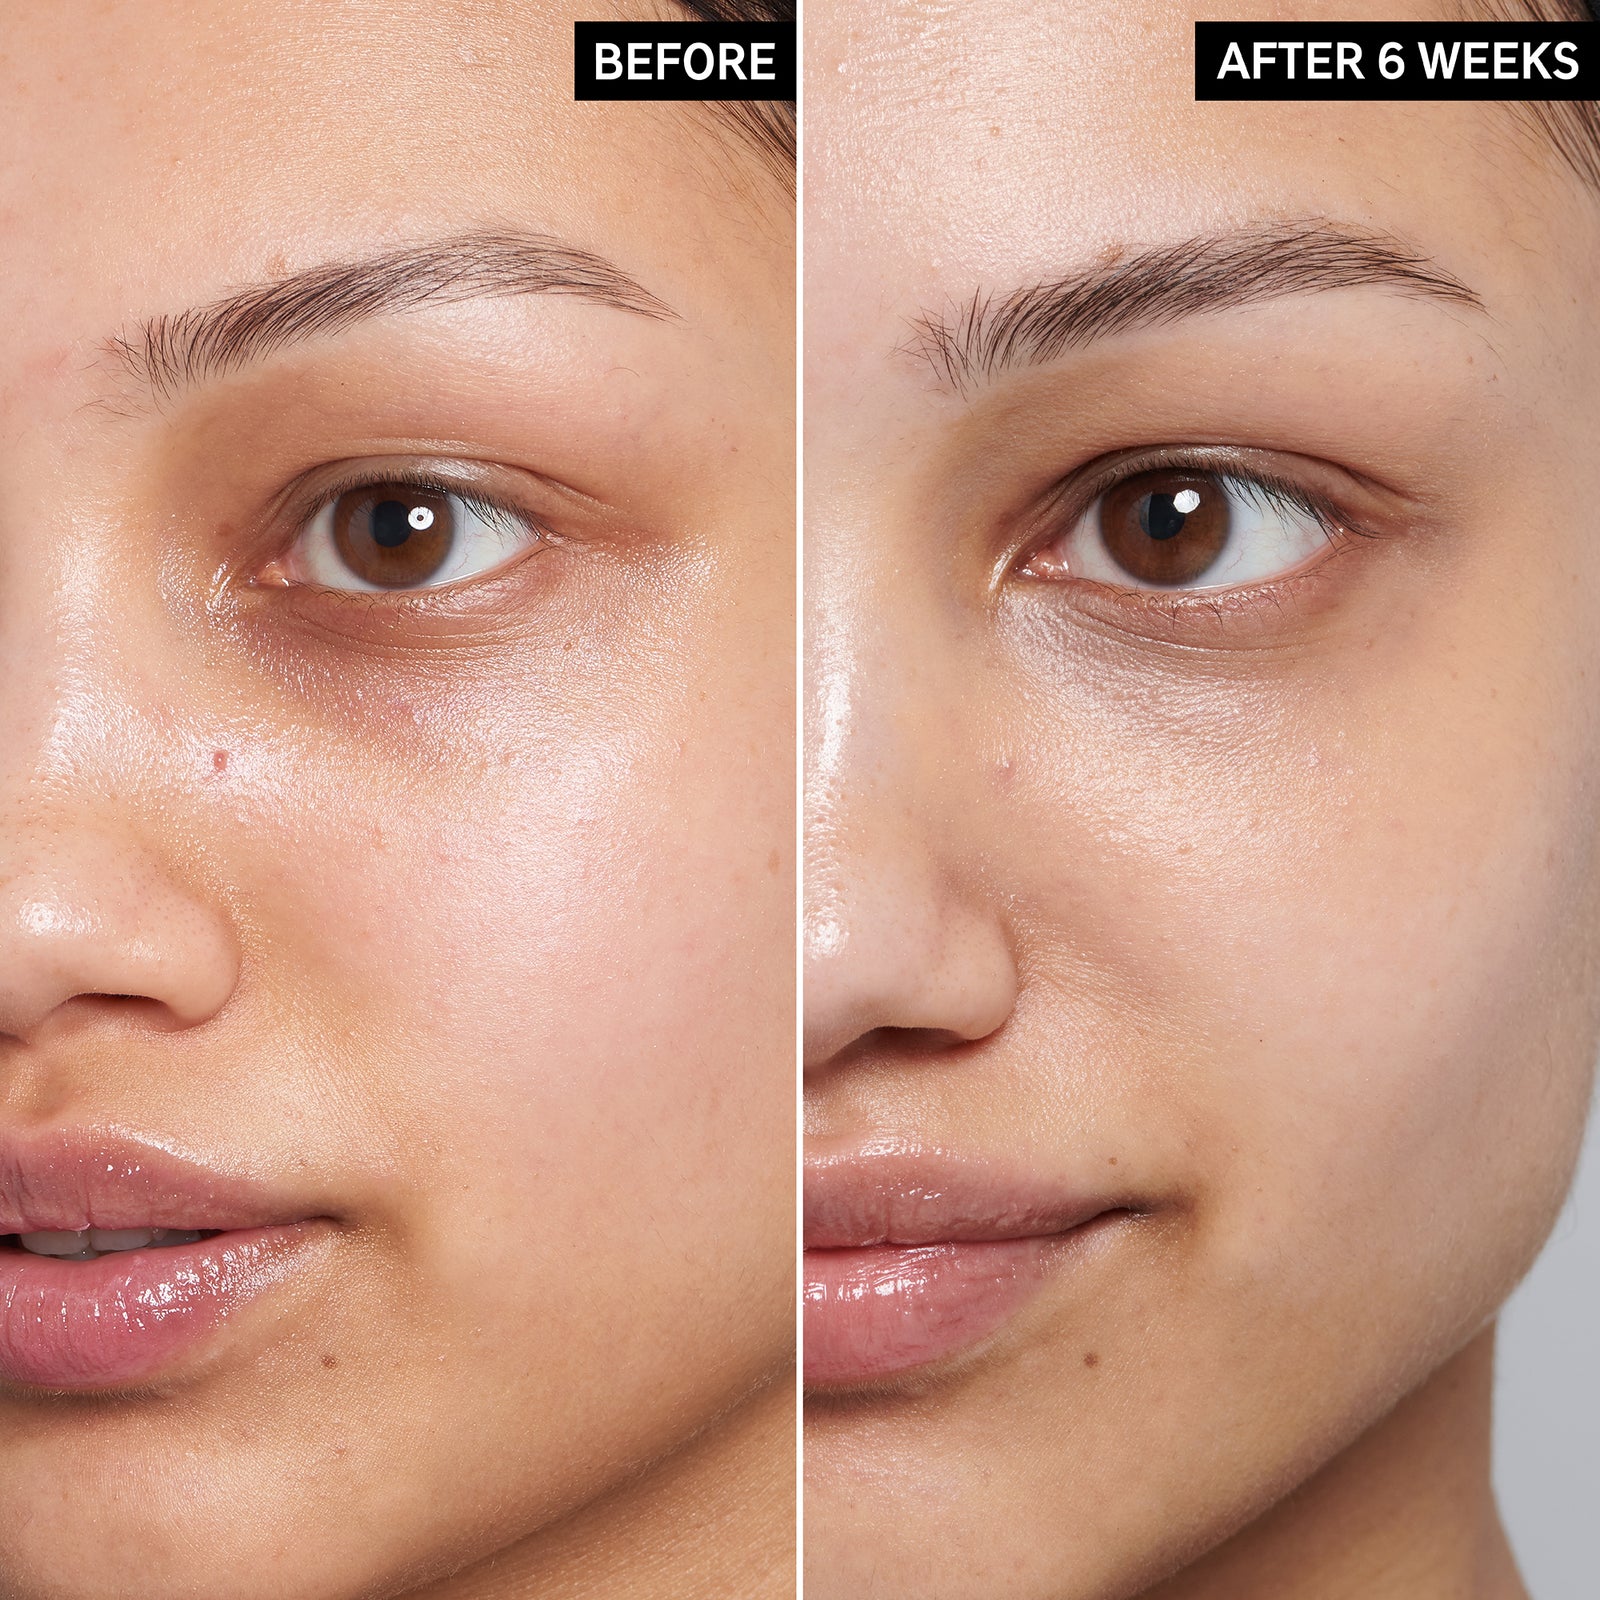 Before and after of using Caffeieien Eye Cream for 6 weeks